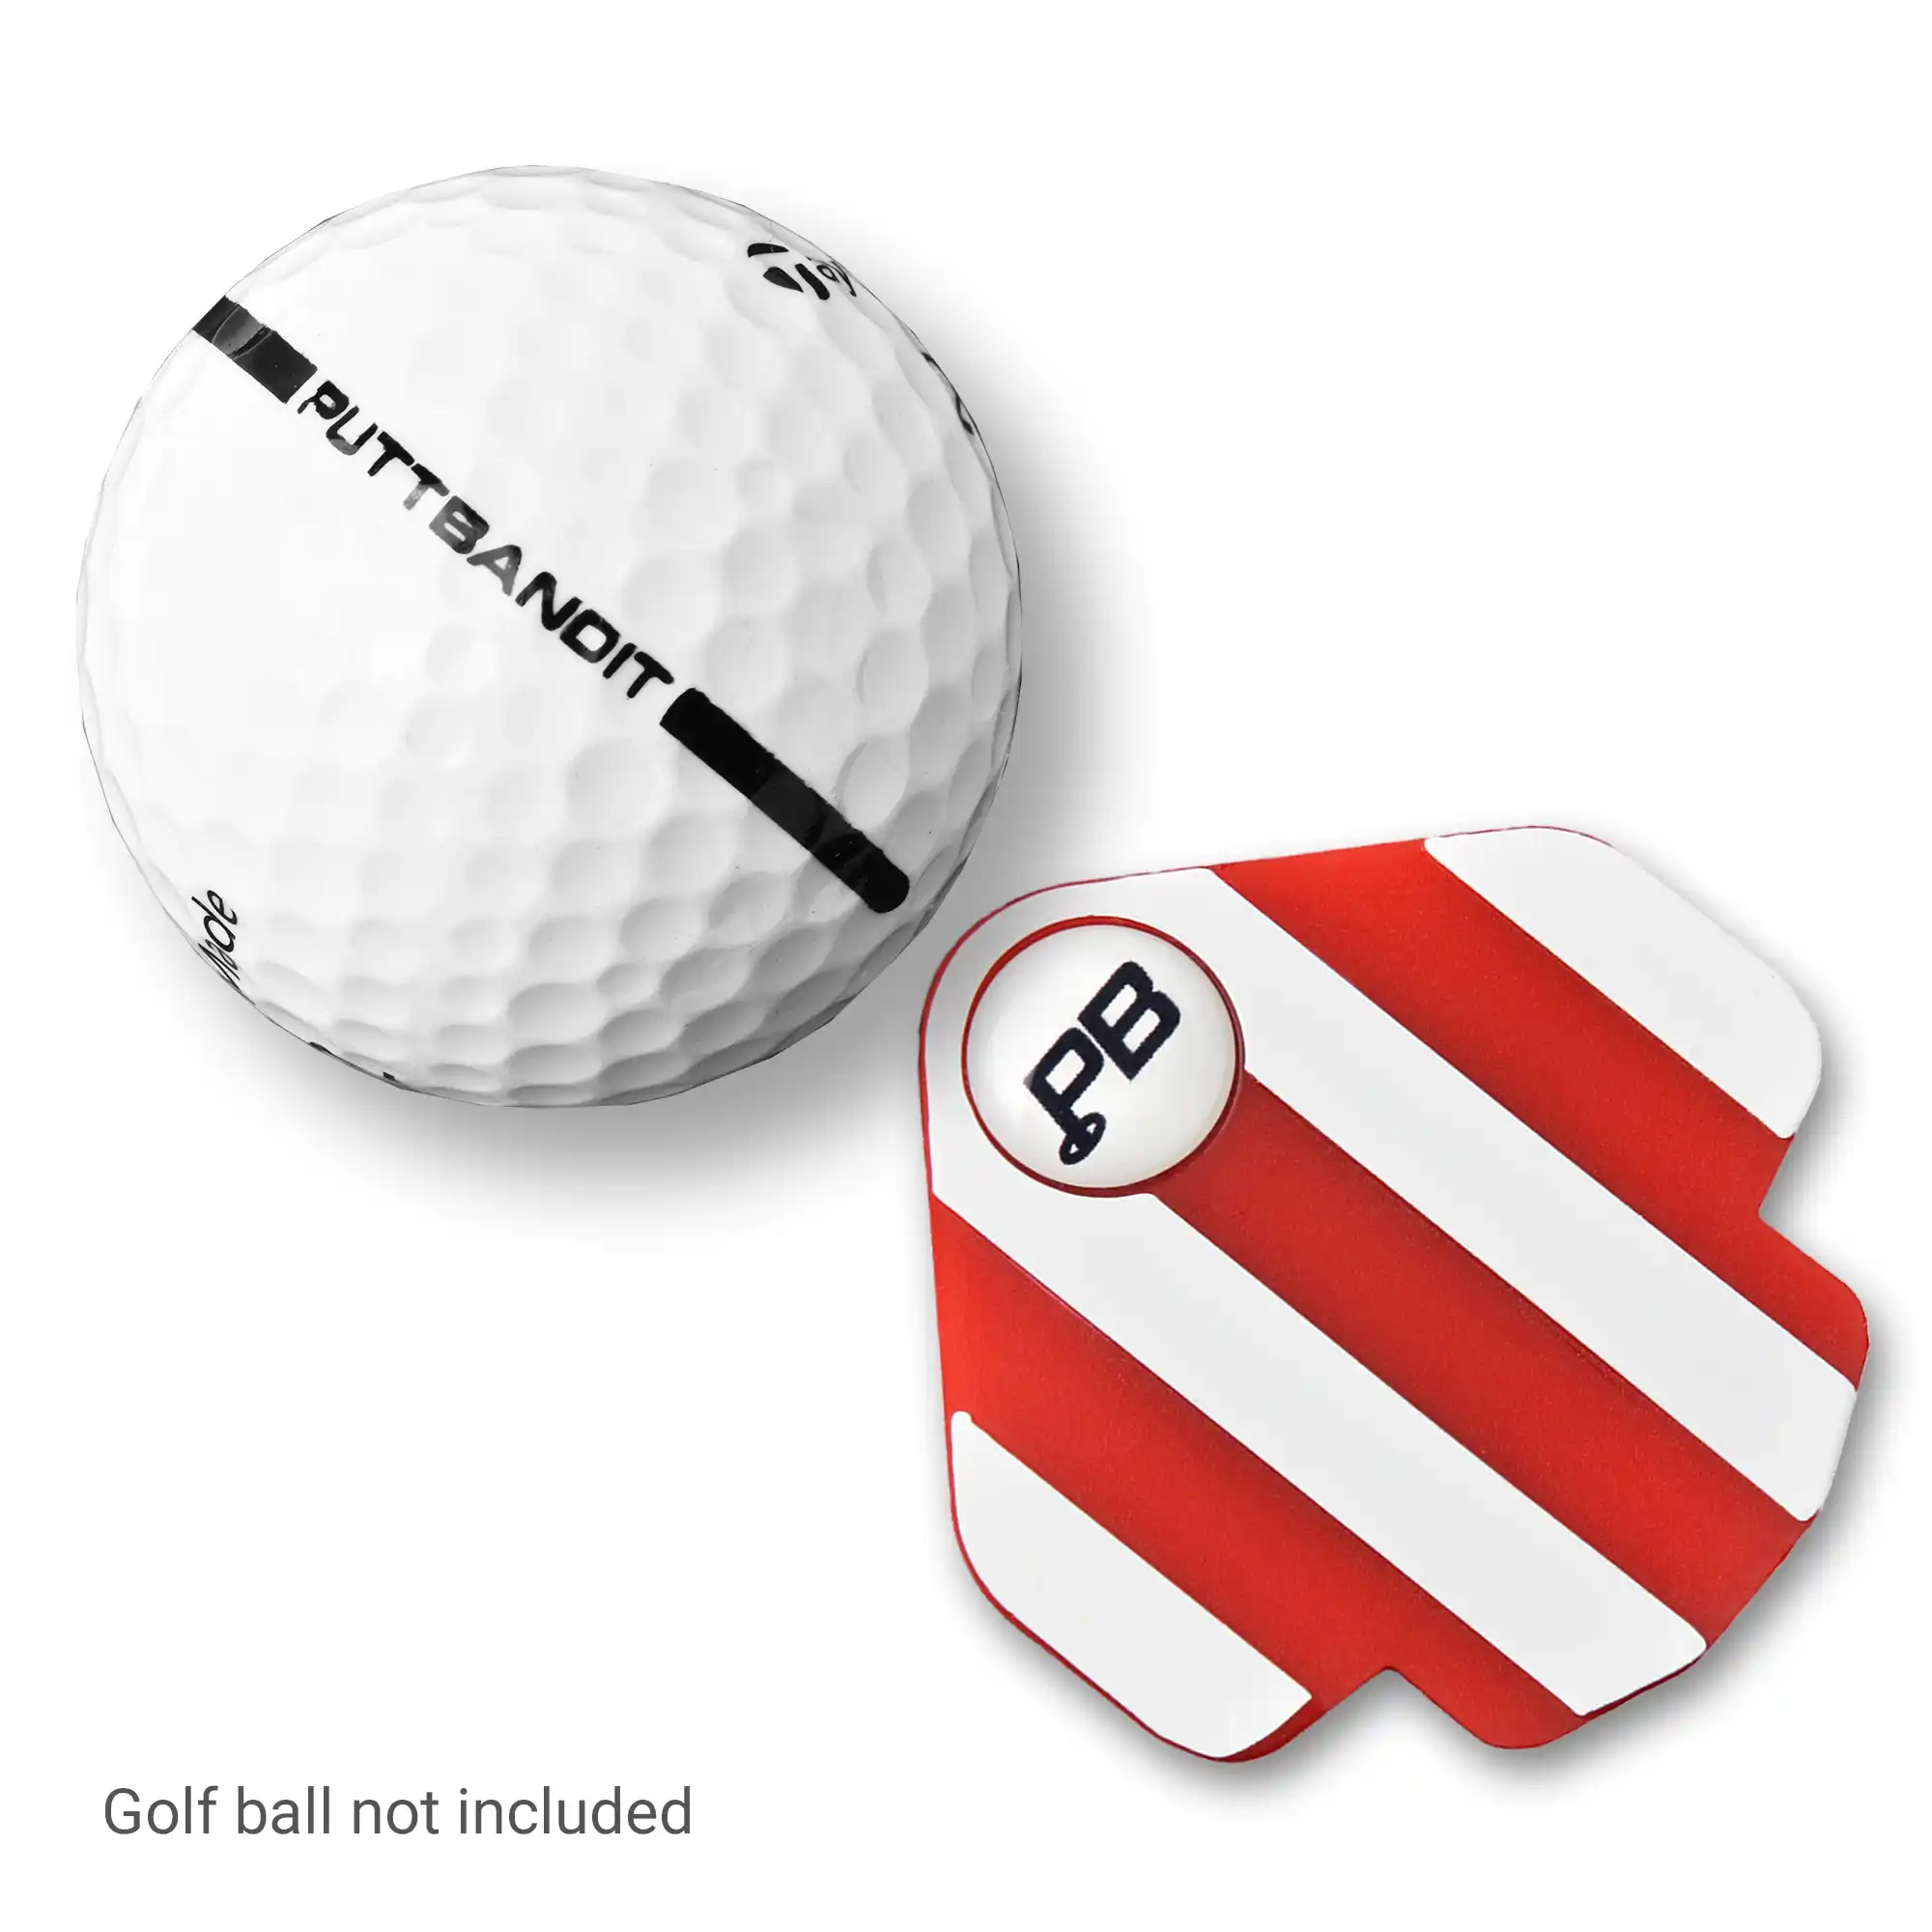 Puttbandit Classic red golf ball marker top view with golf ball, not included text